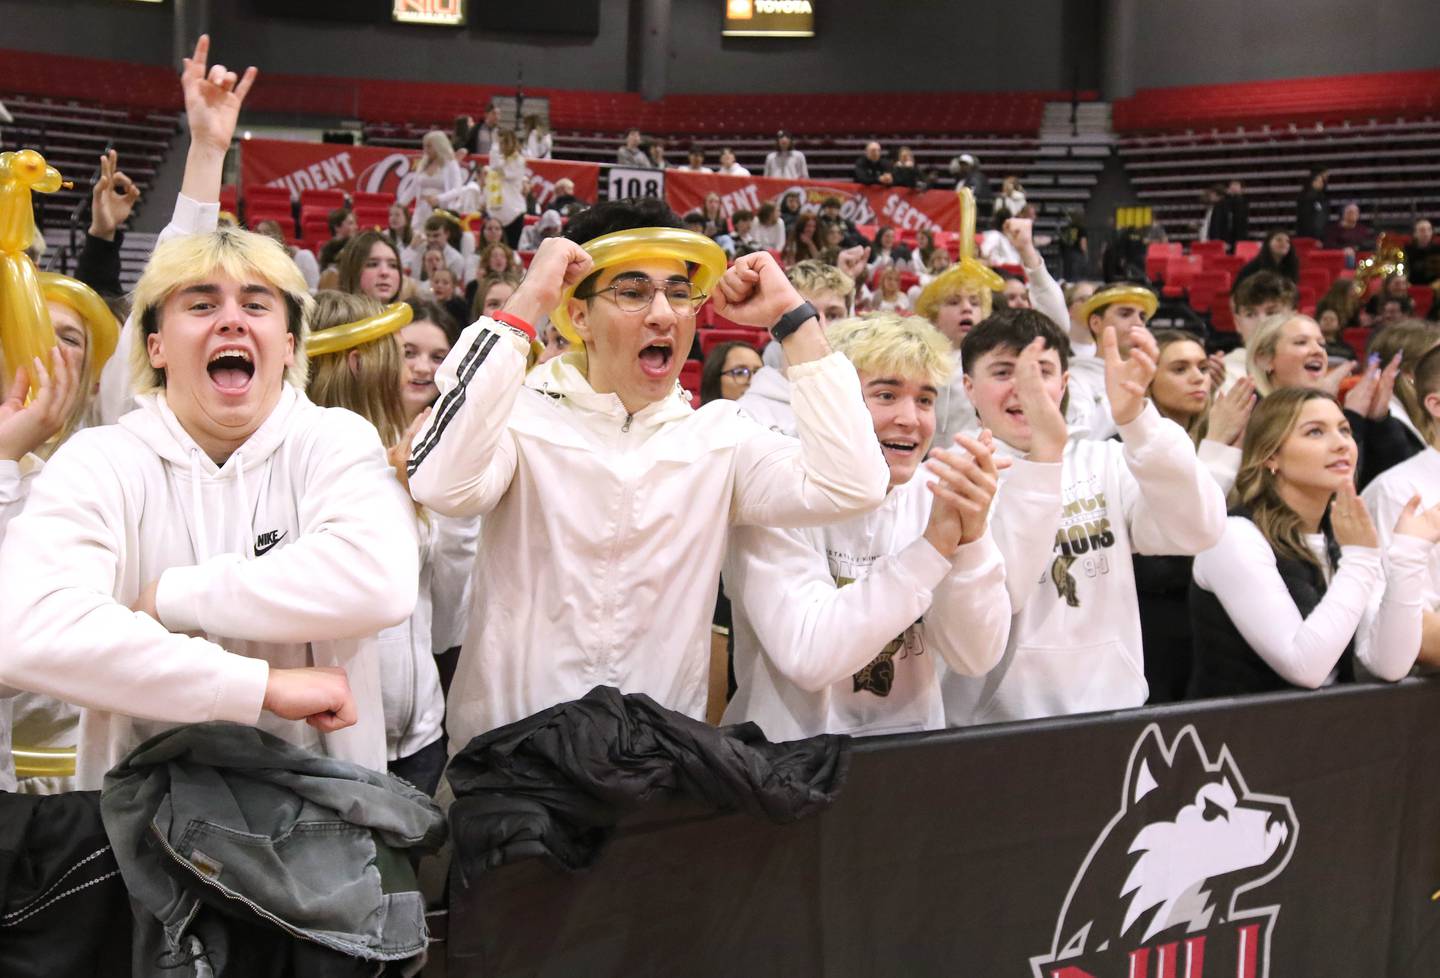 Sycamore fans cheer on their team during the First National Challenge Friday, Jan. 27, 2023, at The Convocation Center on the campus of Northern Illinois University in DeKalb.